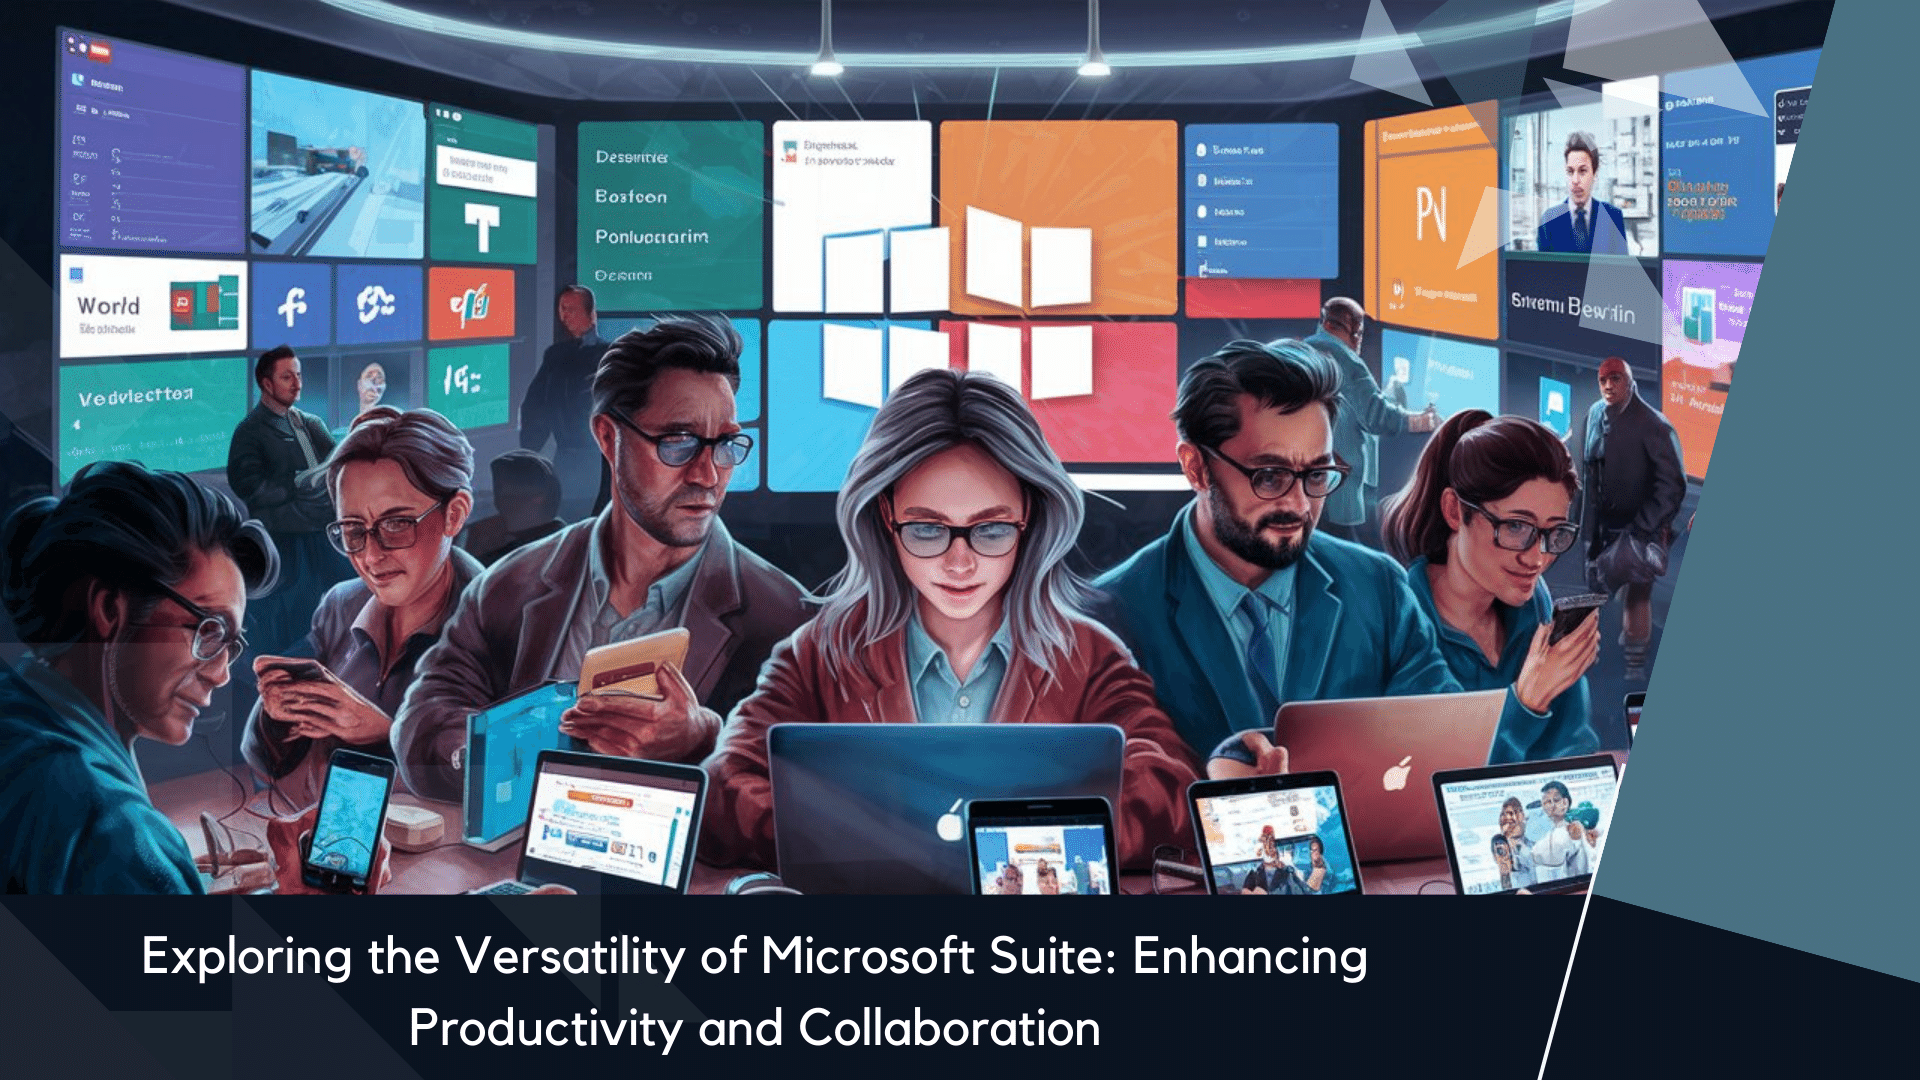 Exploring the Versatility of Microsoft Suite Enhancing Productivity and Collaboration